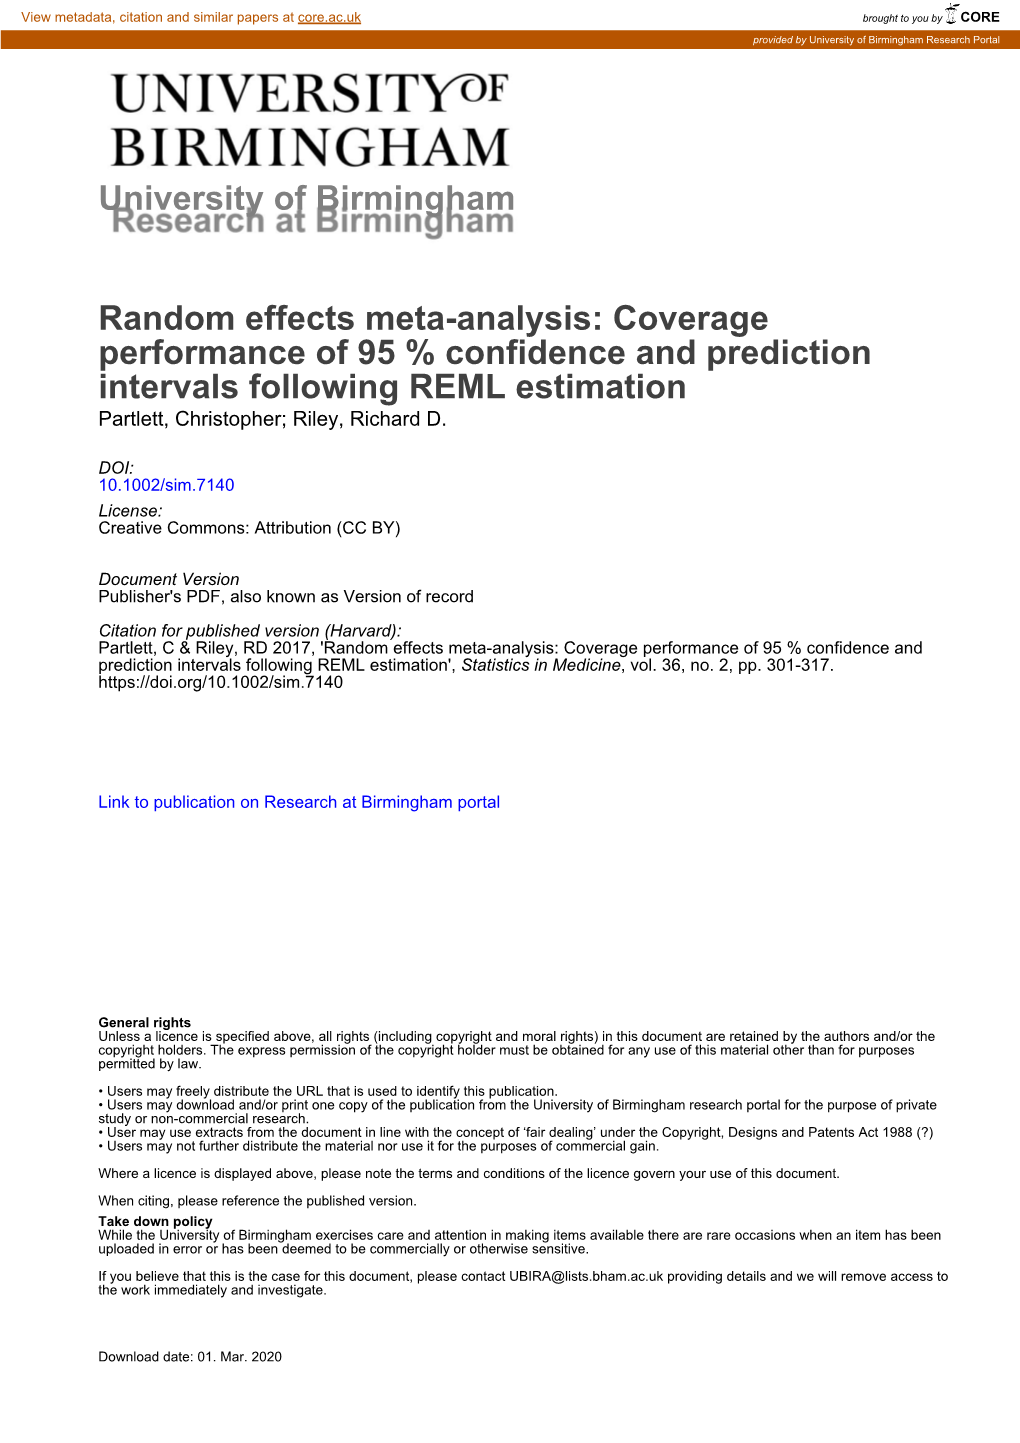 Random Effects Meta-Analysis: Coverage Performance of 95 % Confidence and Prediction Intervals Following REML Estimation Partlett, Christopher; Riley, Richard D